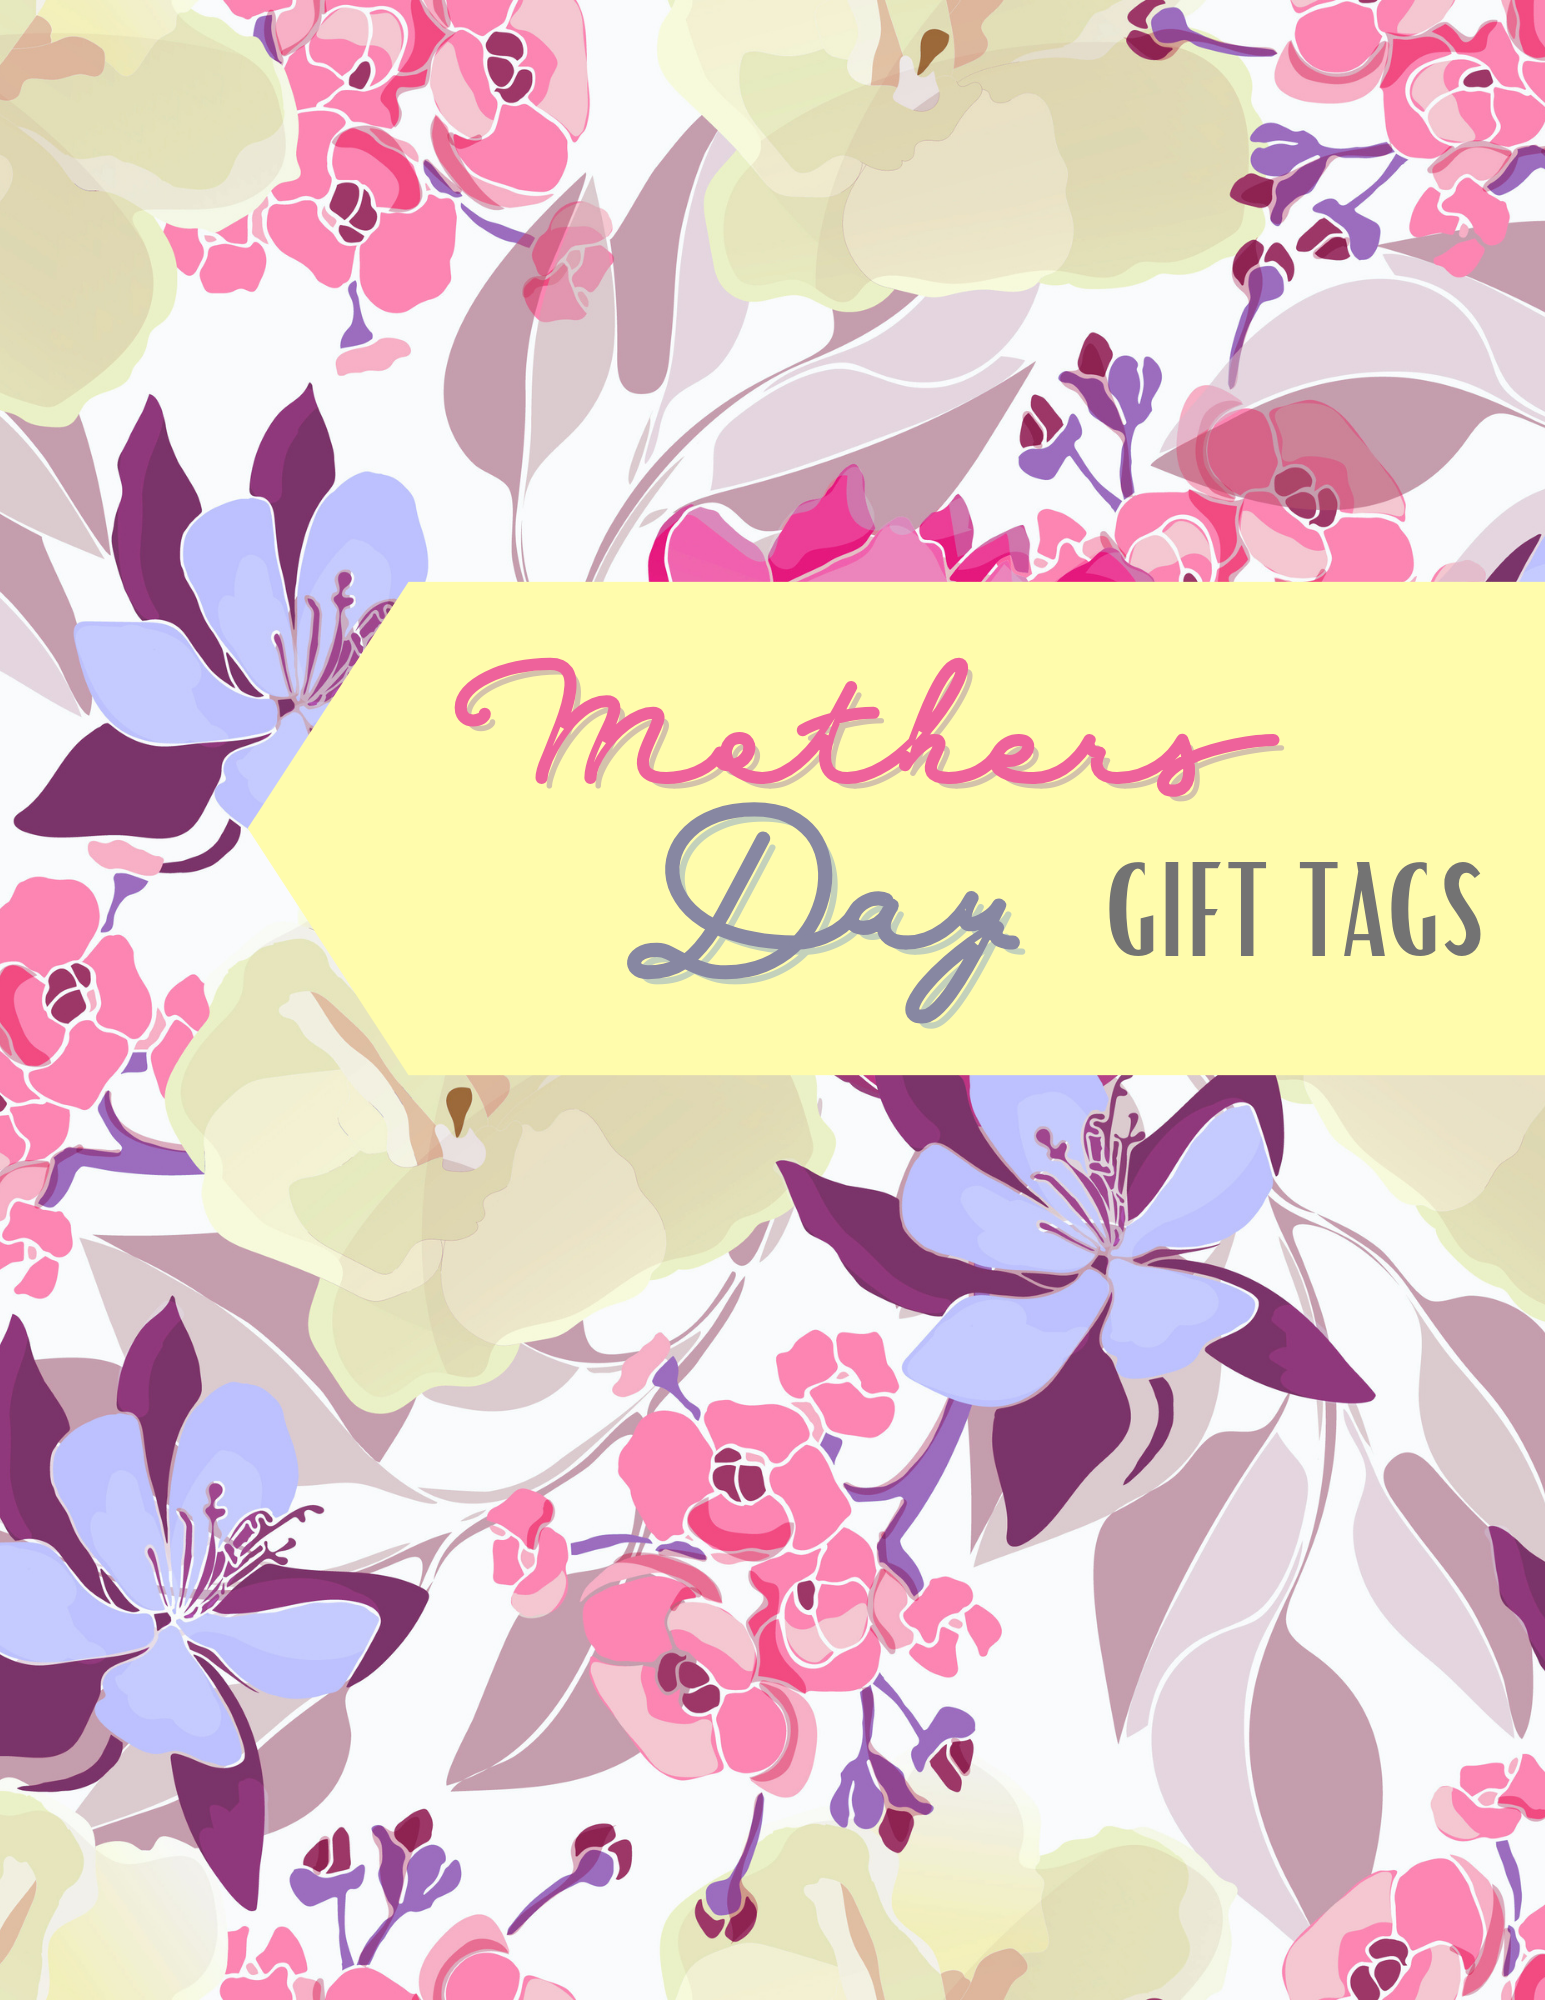 30 + Different Mother’s Day Gift Tags (Free Printable)